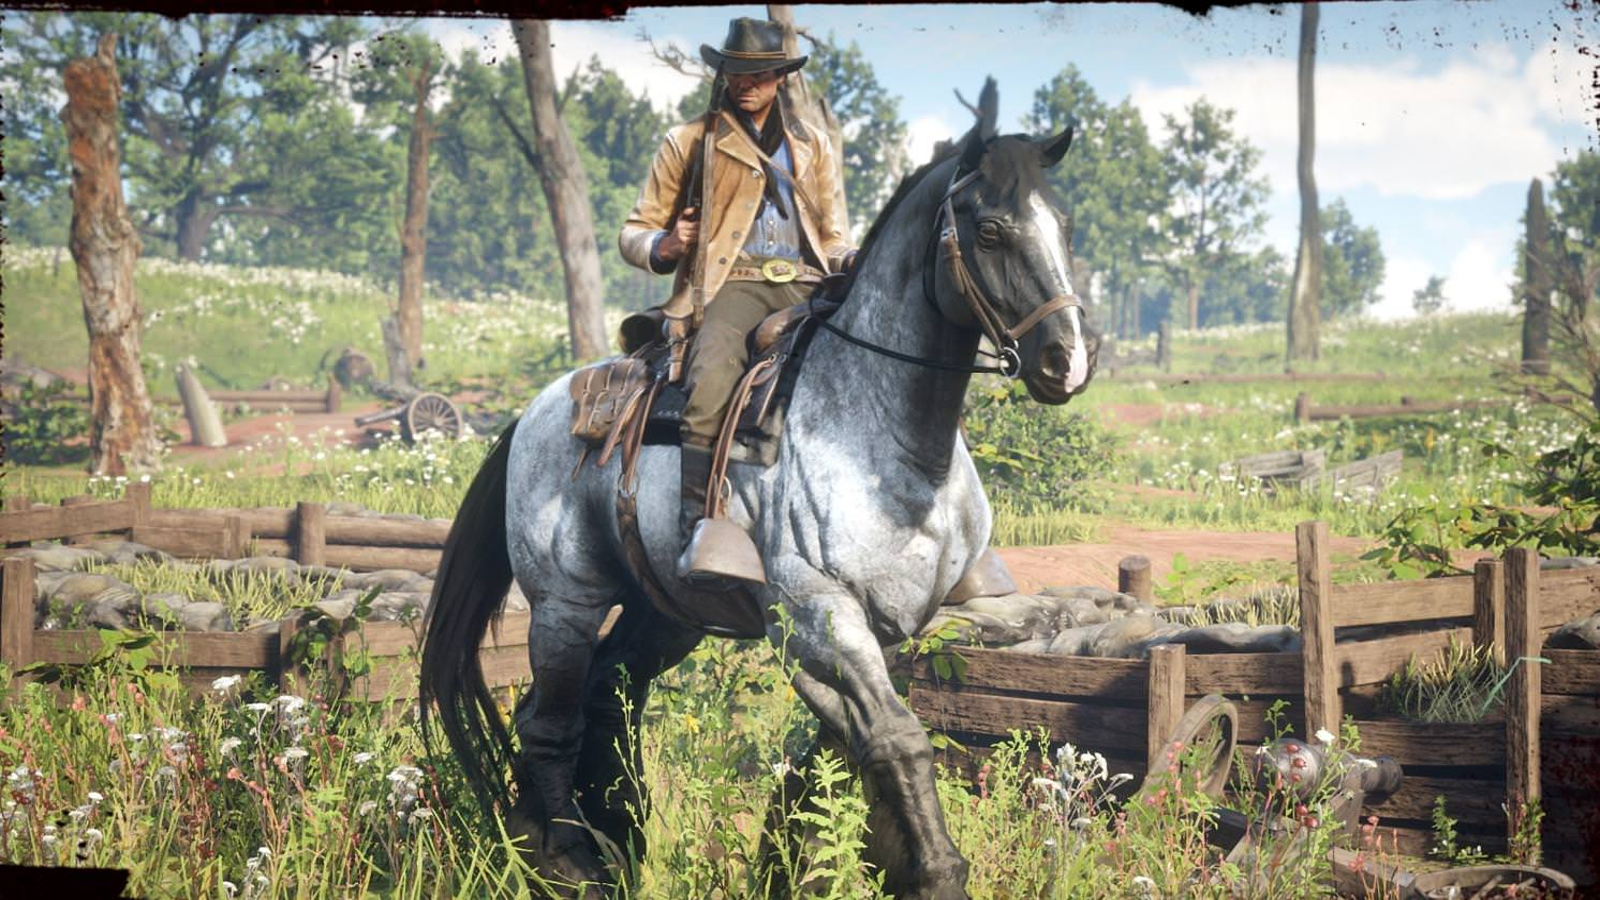 Red Dead Redemption 2 PC requirements, preorder details